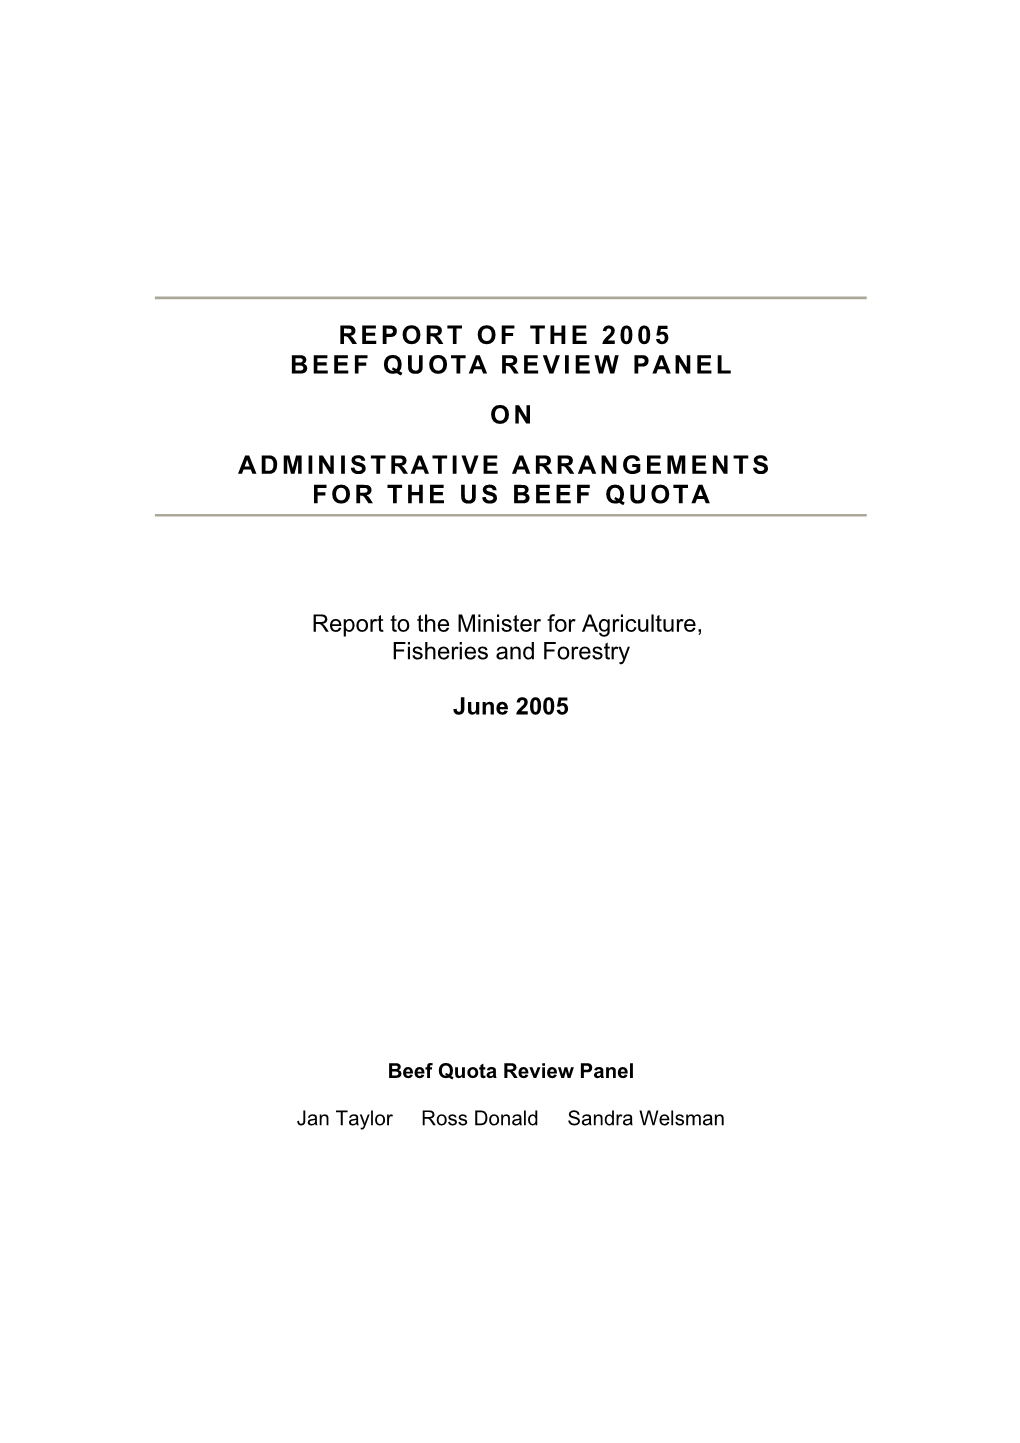 Report of the 2005 Beef Quota Review Panel on Administrative Arrangments for the US Beef Quota